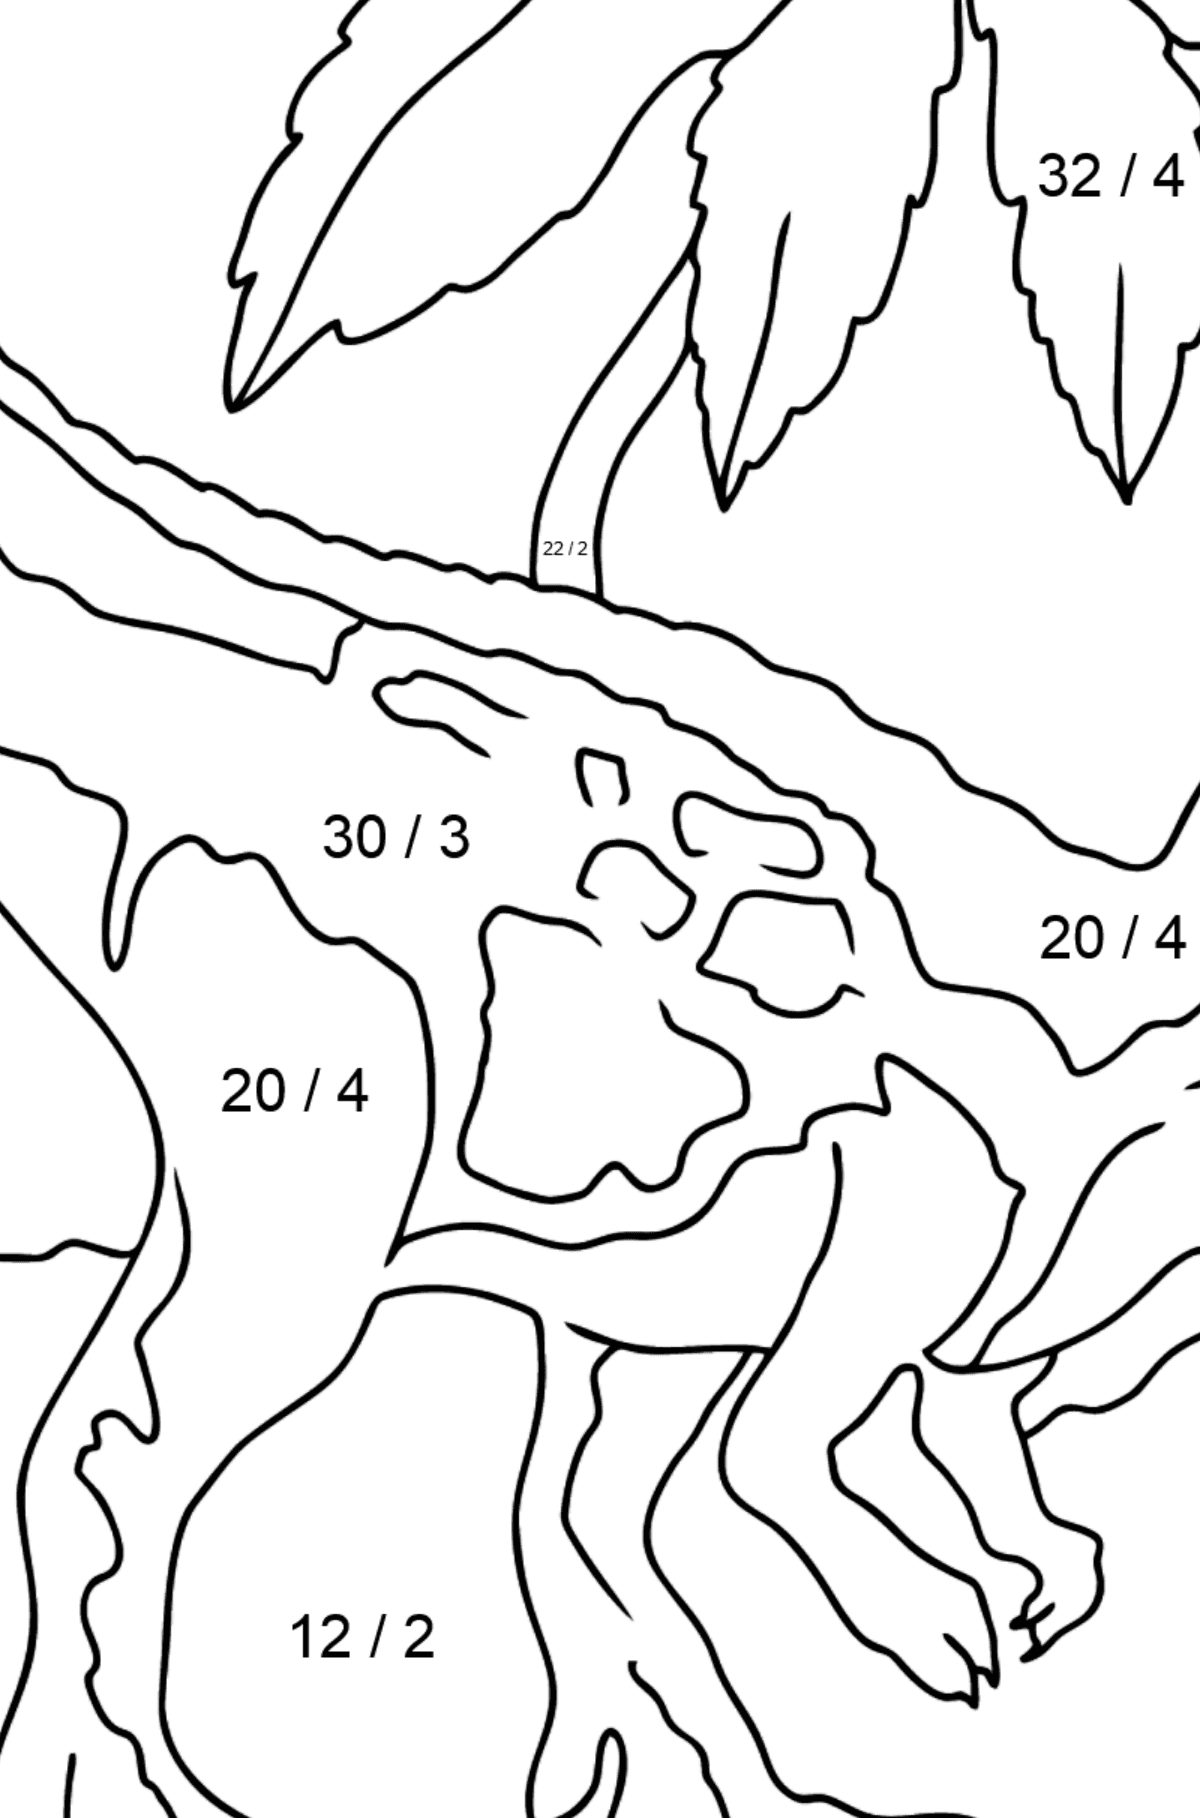 Coloring Page - Tyrannosaurus - The Best Hunter Among Dinosaurs - Math Coloring - Division for Kids